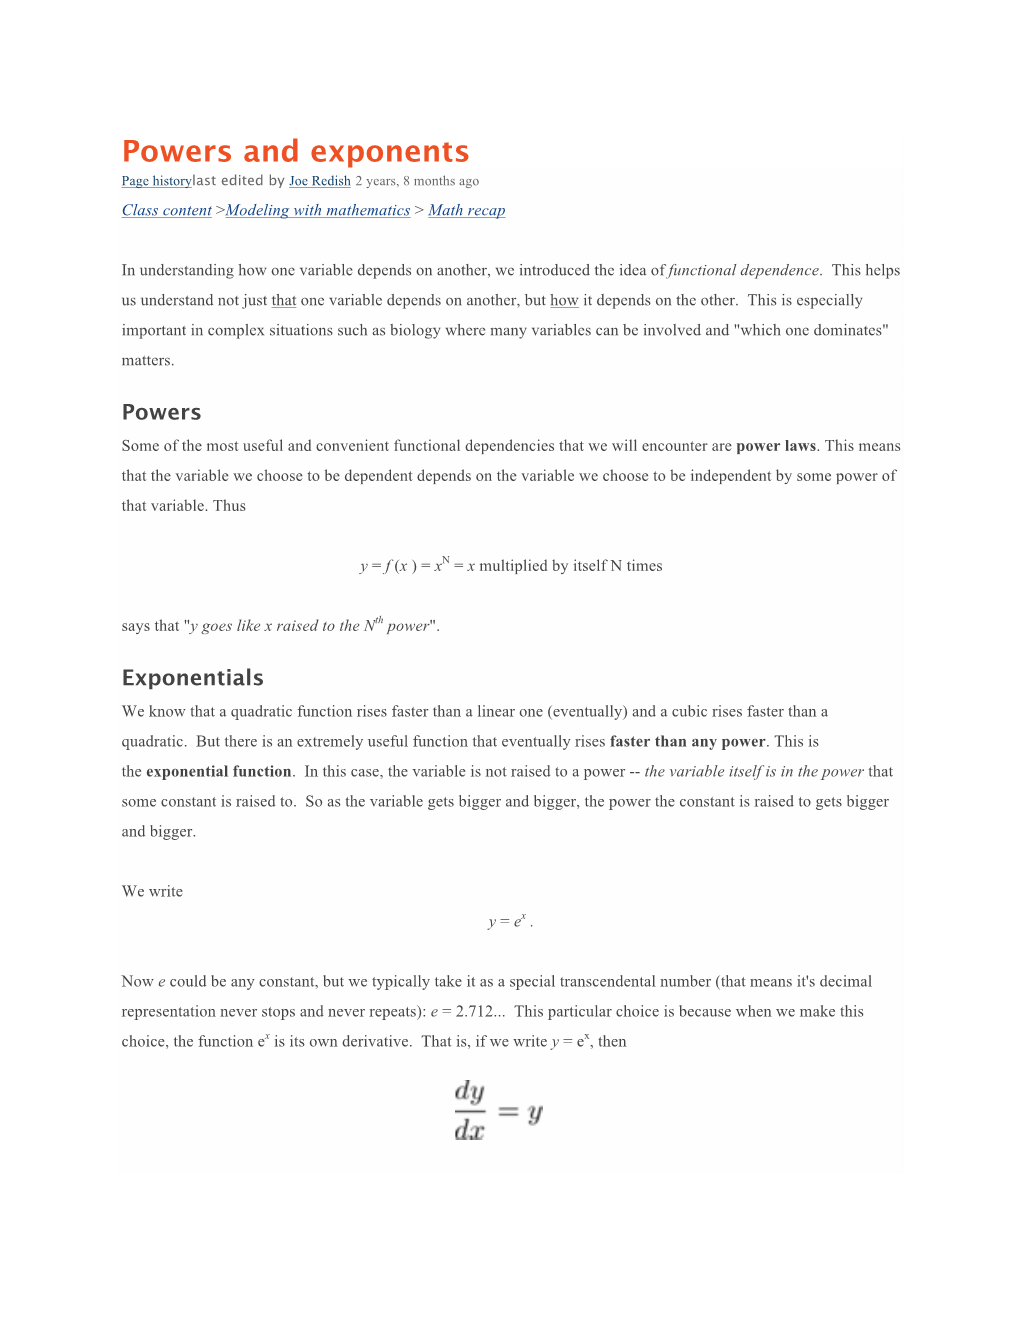 Powers and Exponents Page Historylast Edited by Joe Redish 2 Years, 8 Months Ago Class Content >Modeling with Mathematics > Math Recap